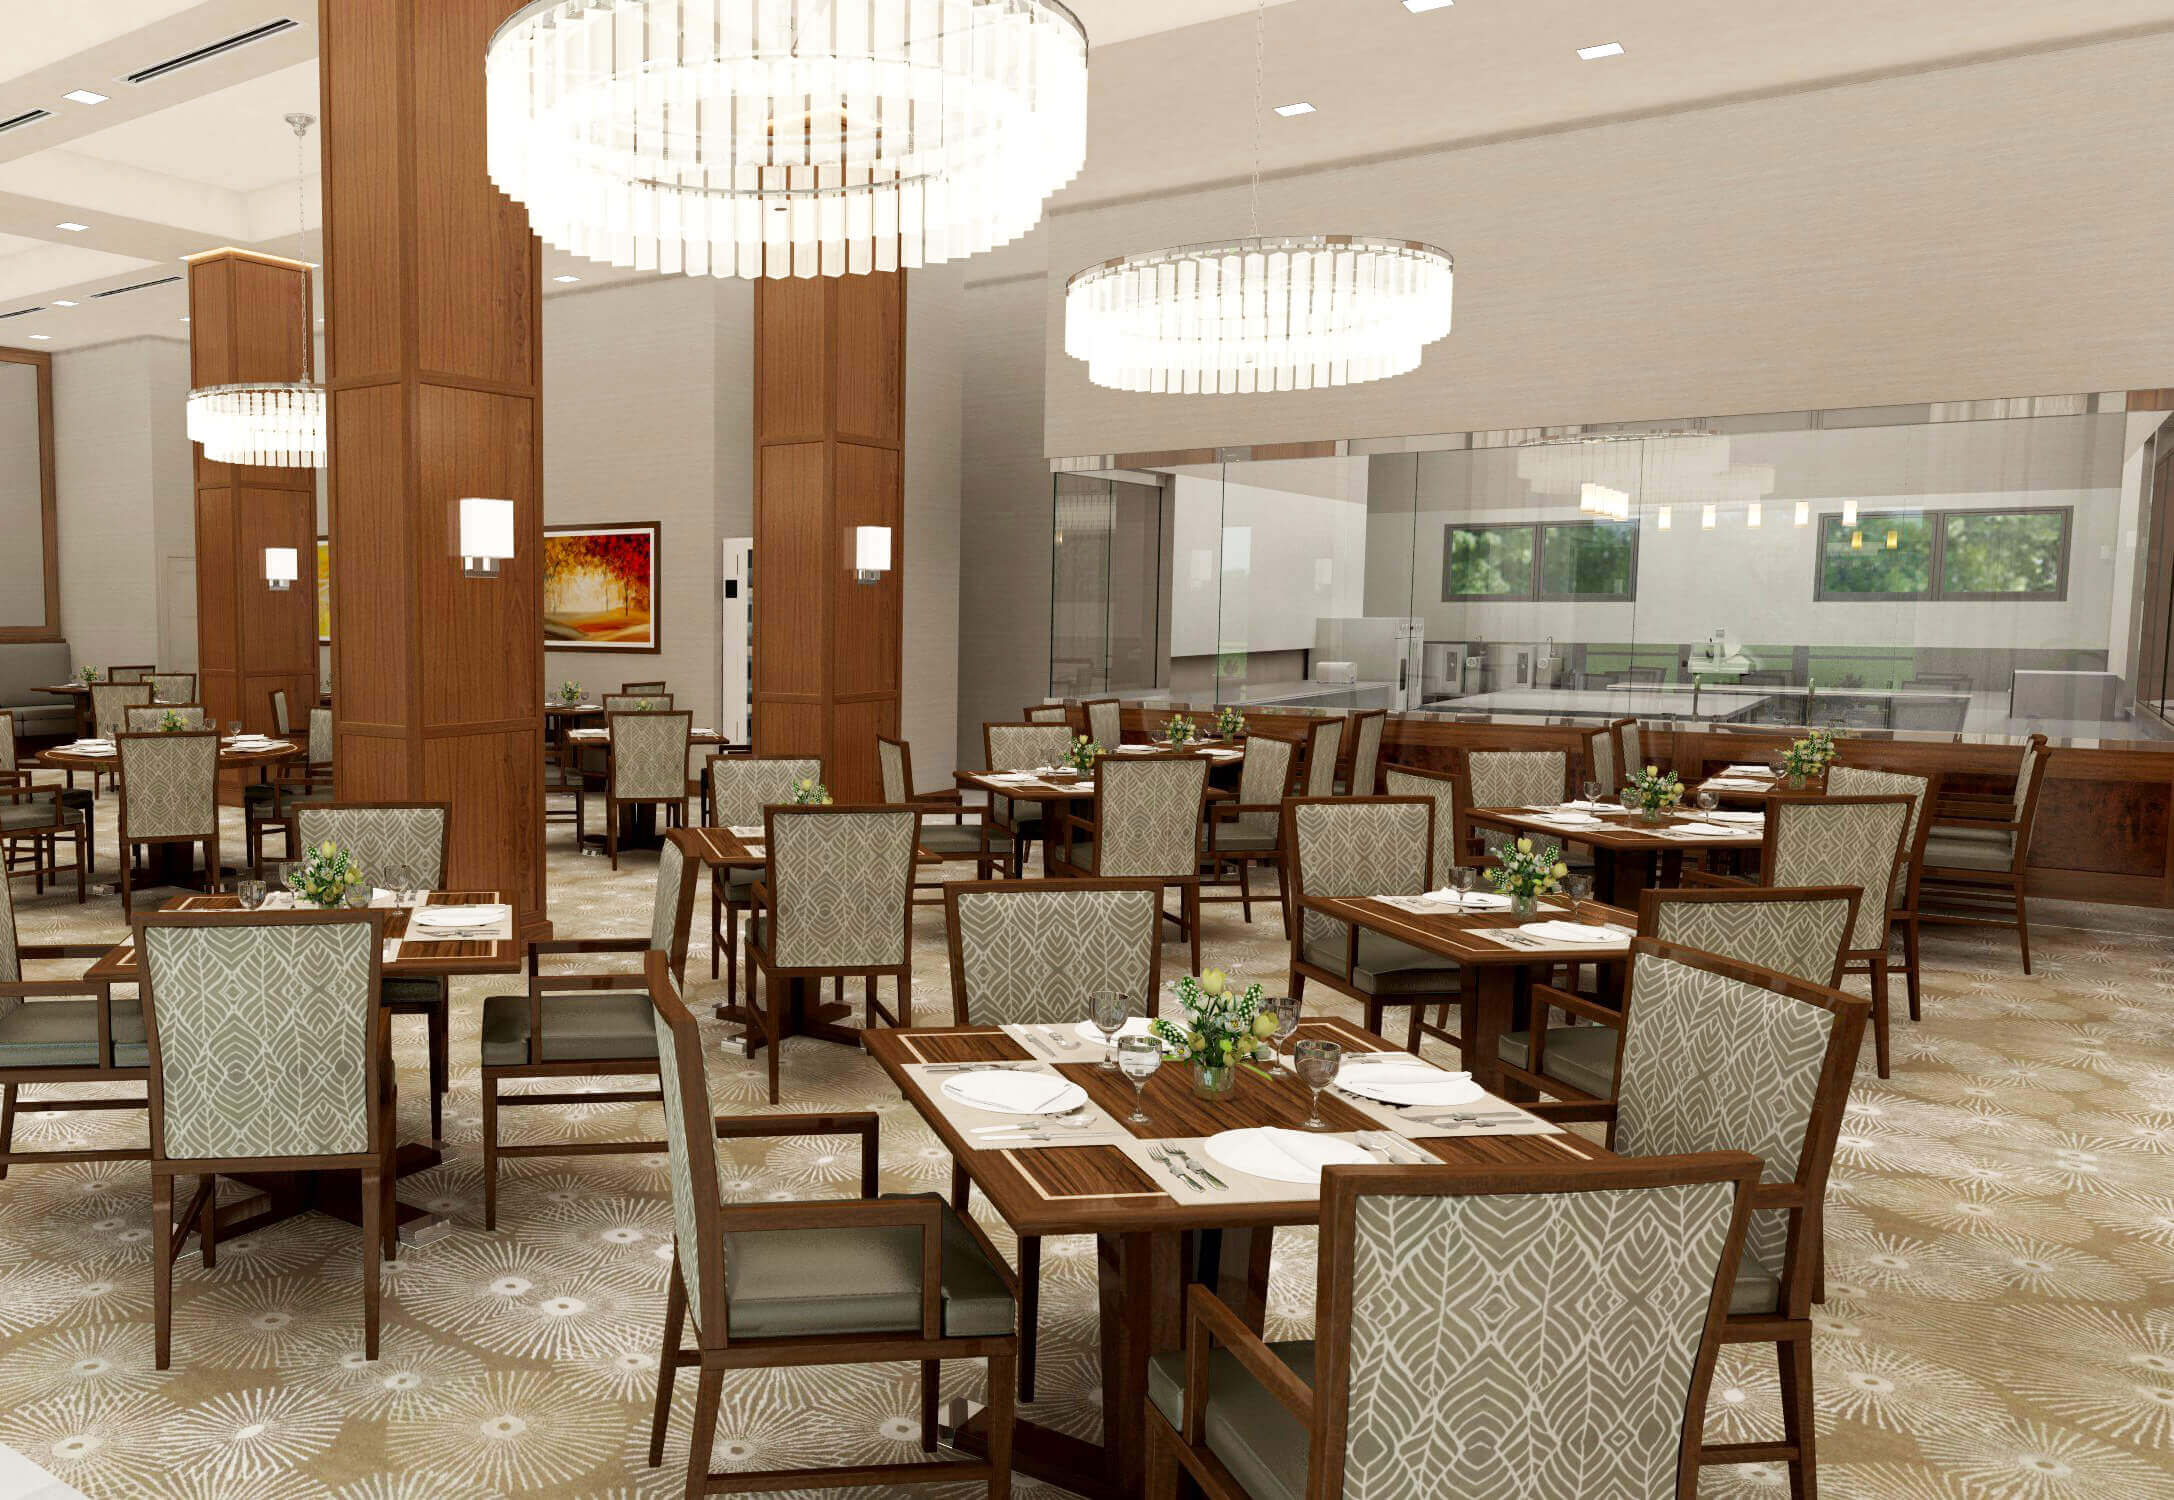 Render image of the dining room